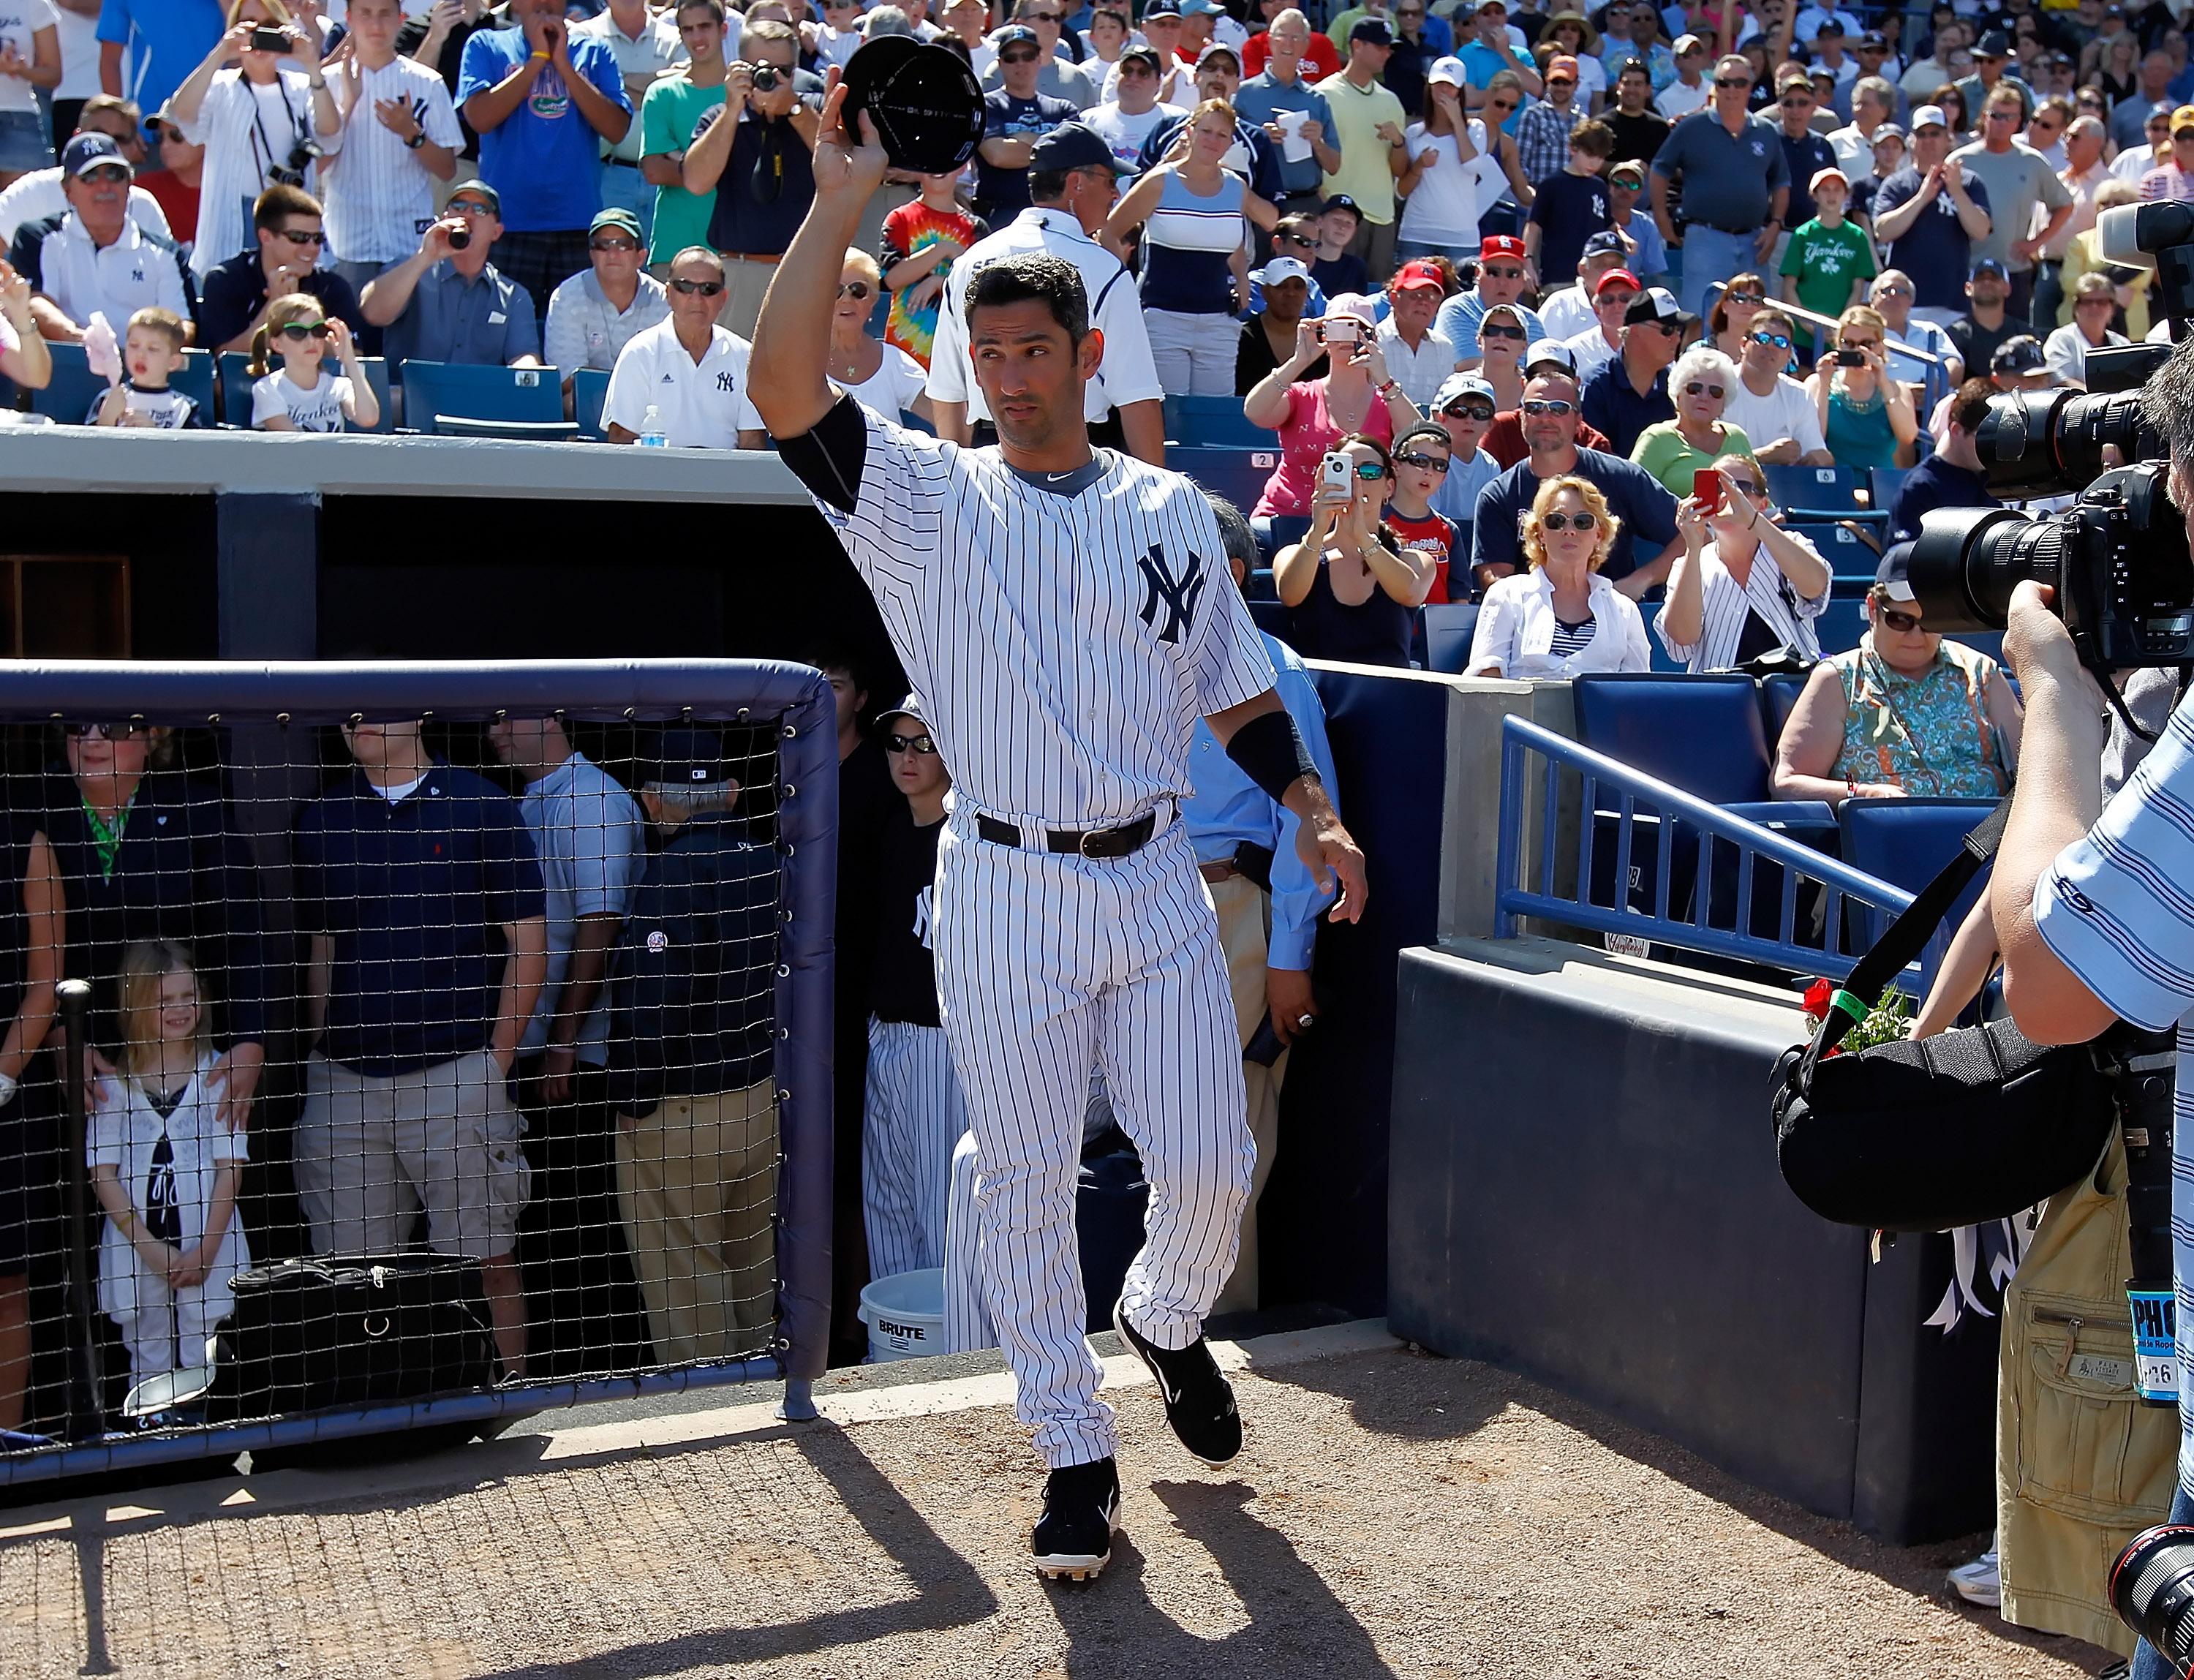 Jorge Posada wouldn't be surprised if Andy Pettitte changed his